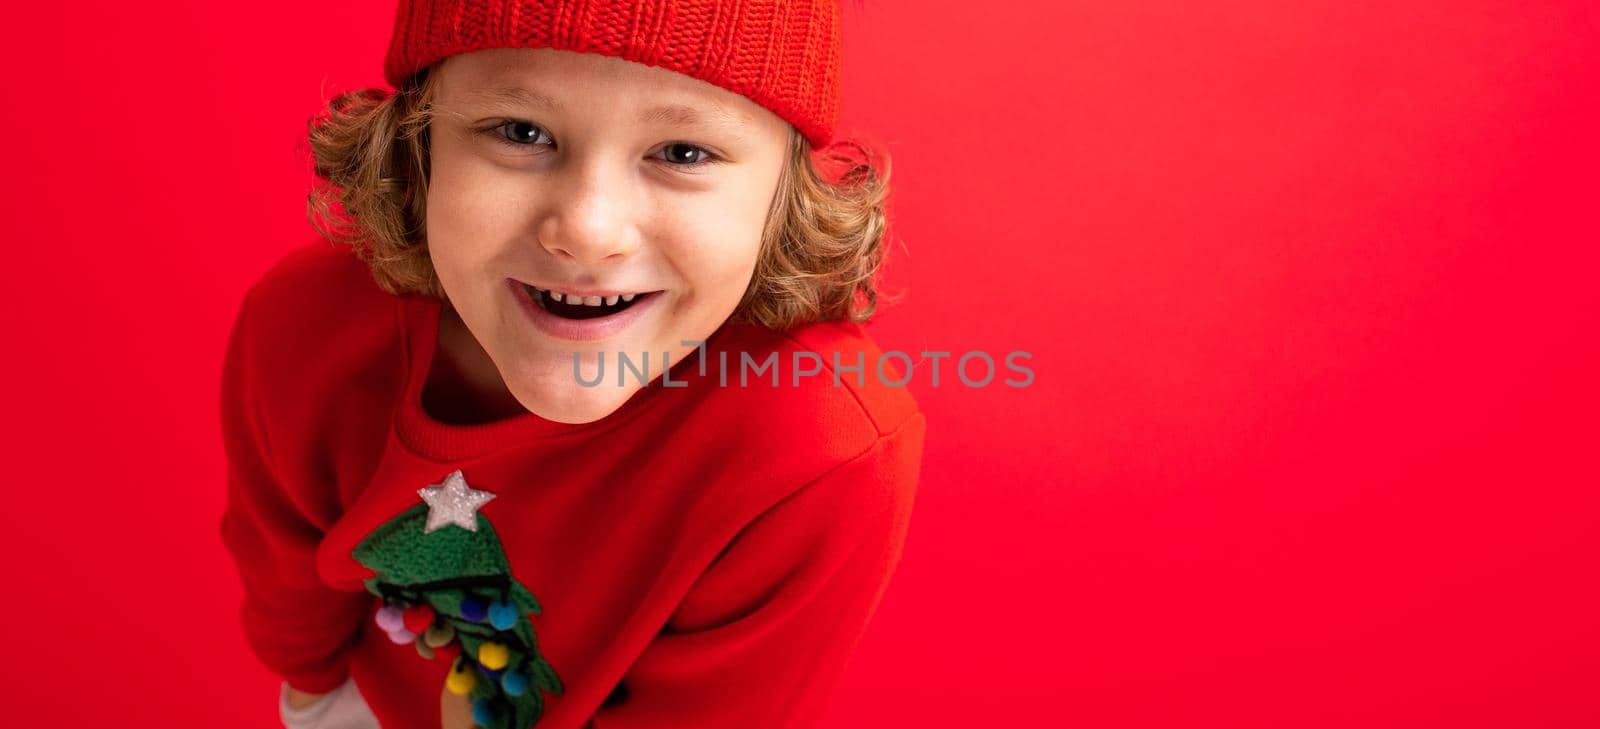 cool blond kid in warm hat and sweater with christmas tree on red background fooling around, christmas concept by TRMK